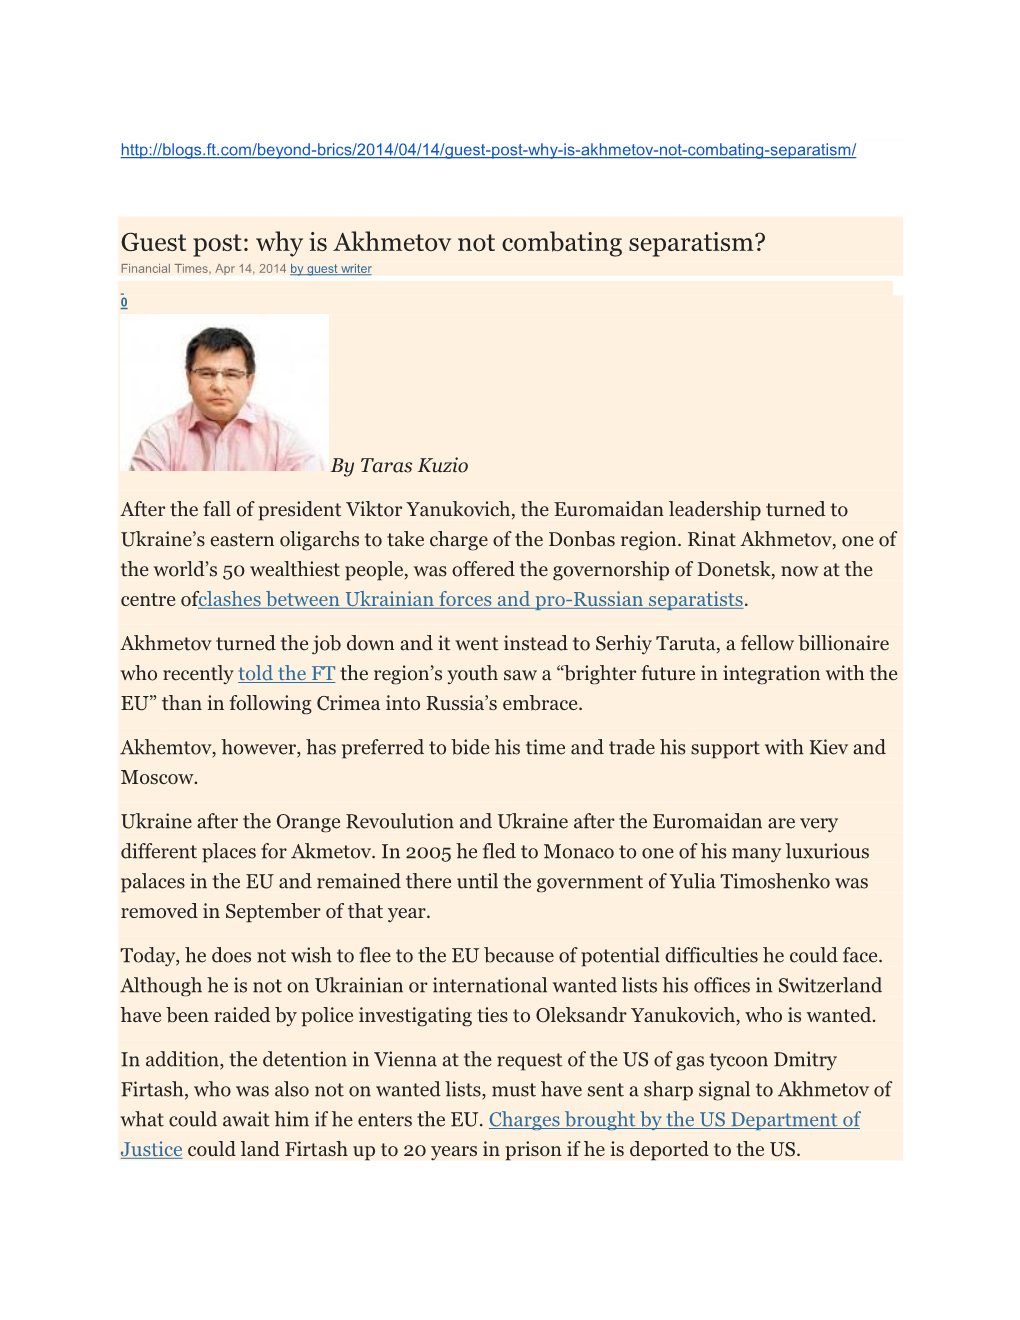 Why Is Akhmetov Not Combating Separatism? Financial Times, Apr 14, 2014 by Guest Writer